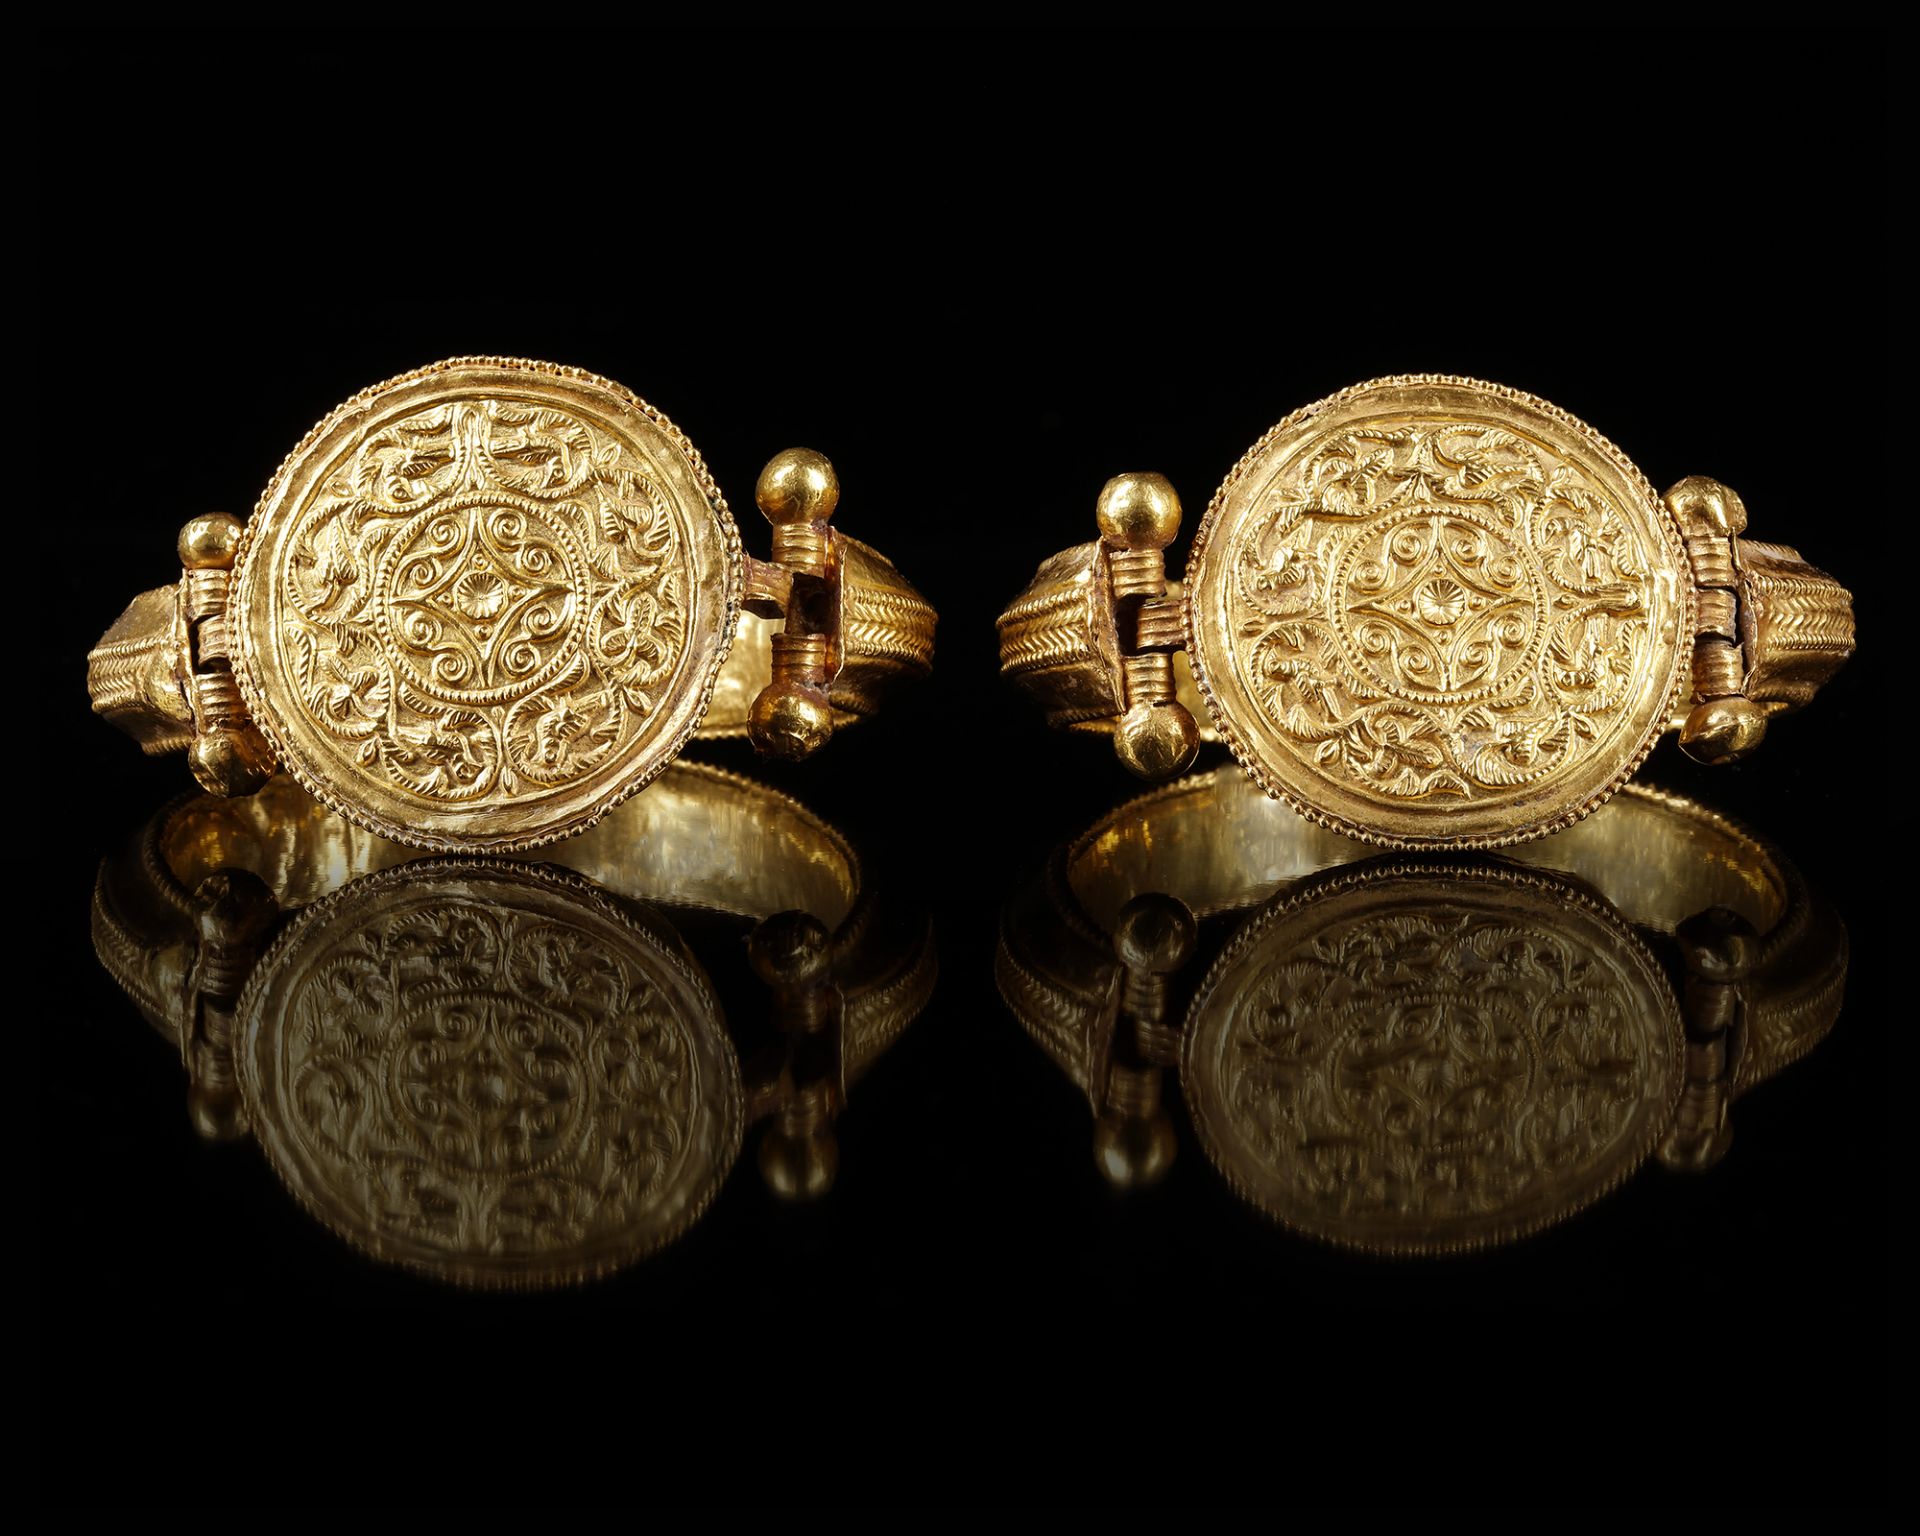 A RARE PAIR OF A FATIMID GOLD BRACELETS, POSSIBLY SYRIA, 11TH CENTURY - Image 2 of 7